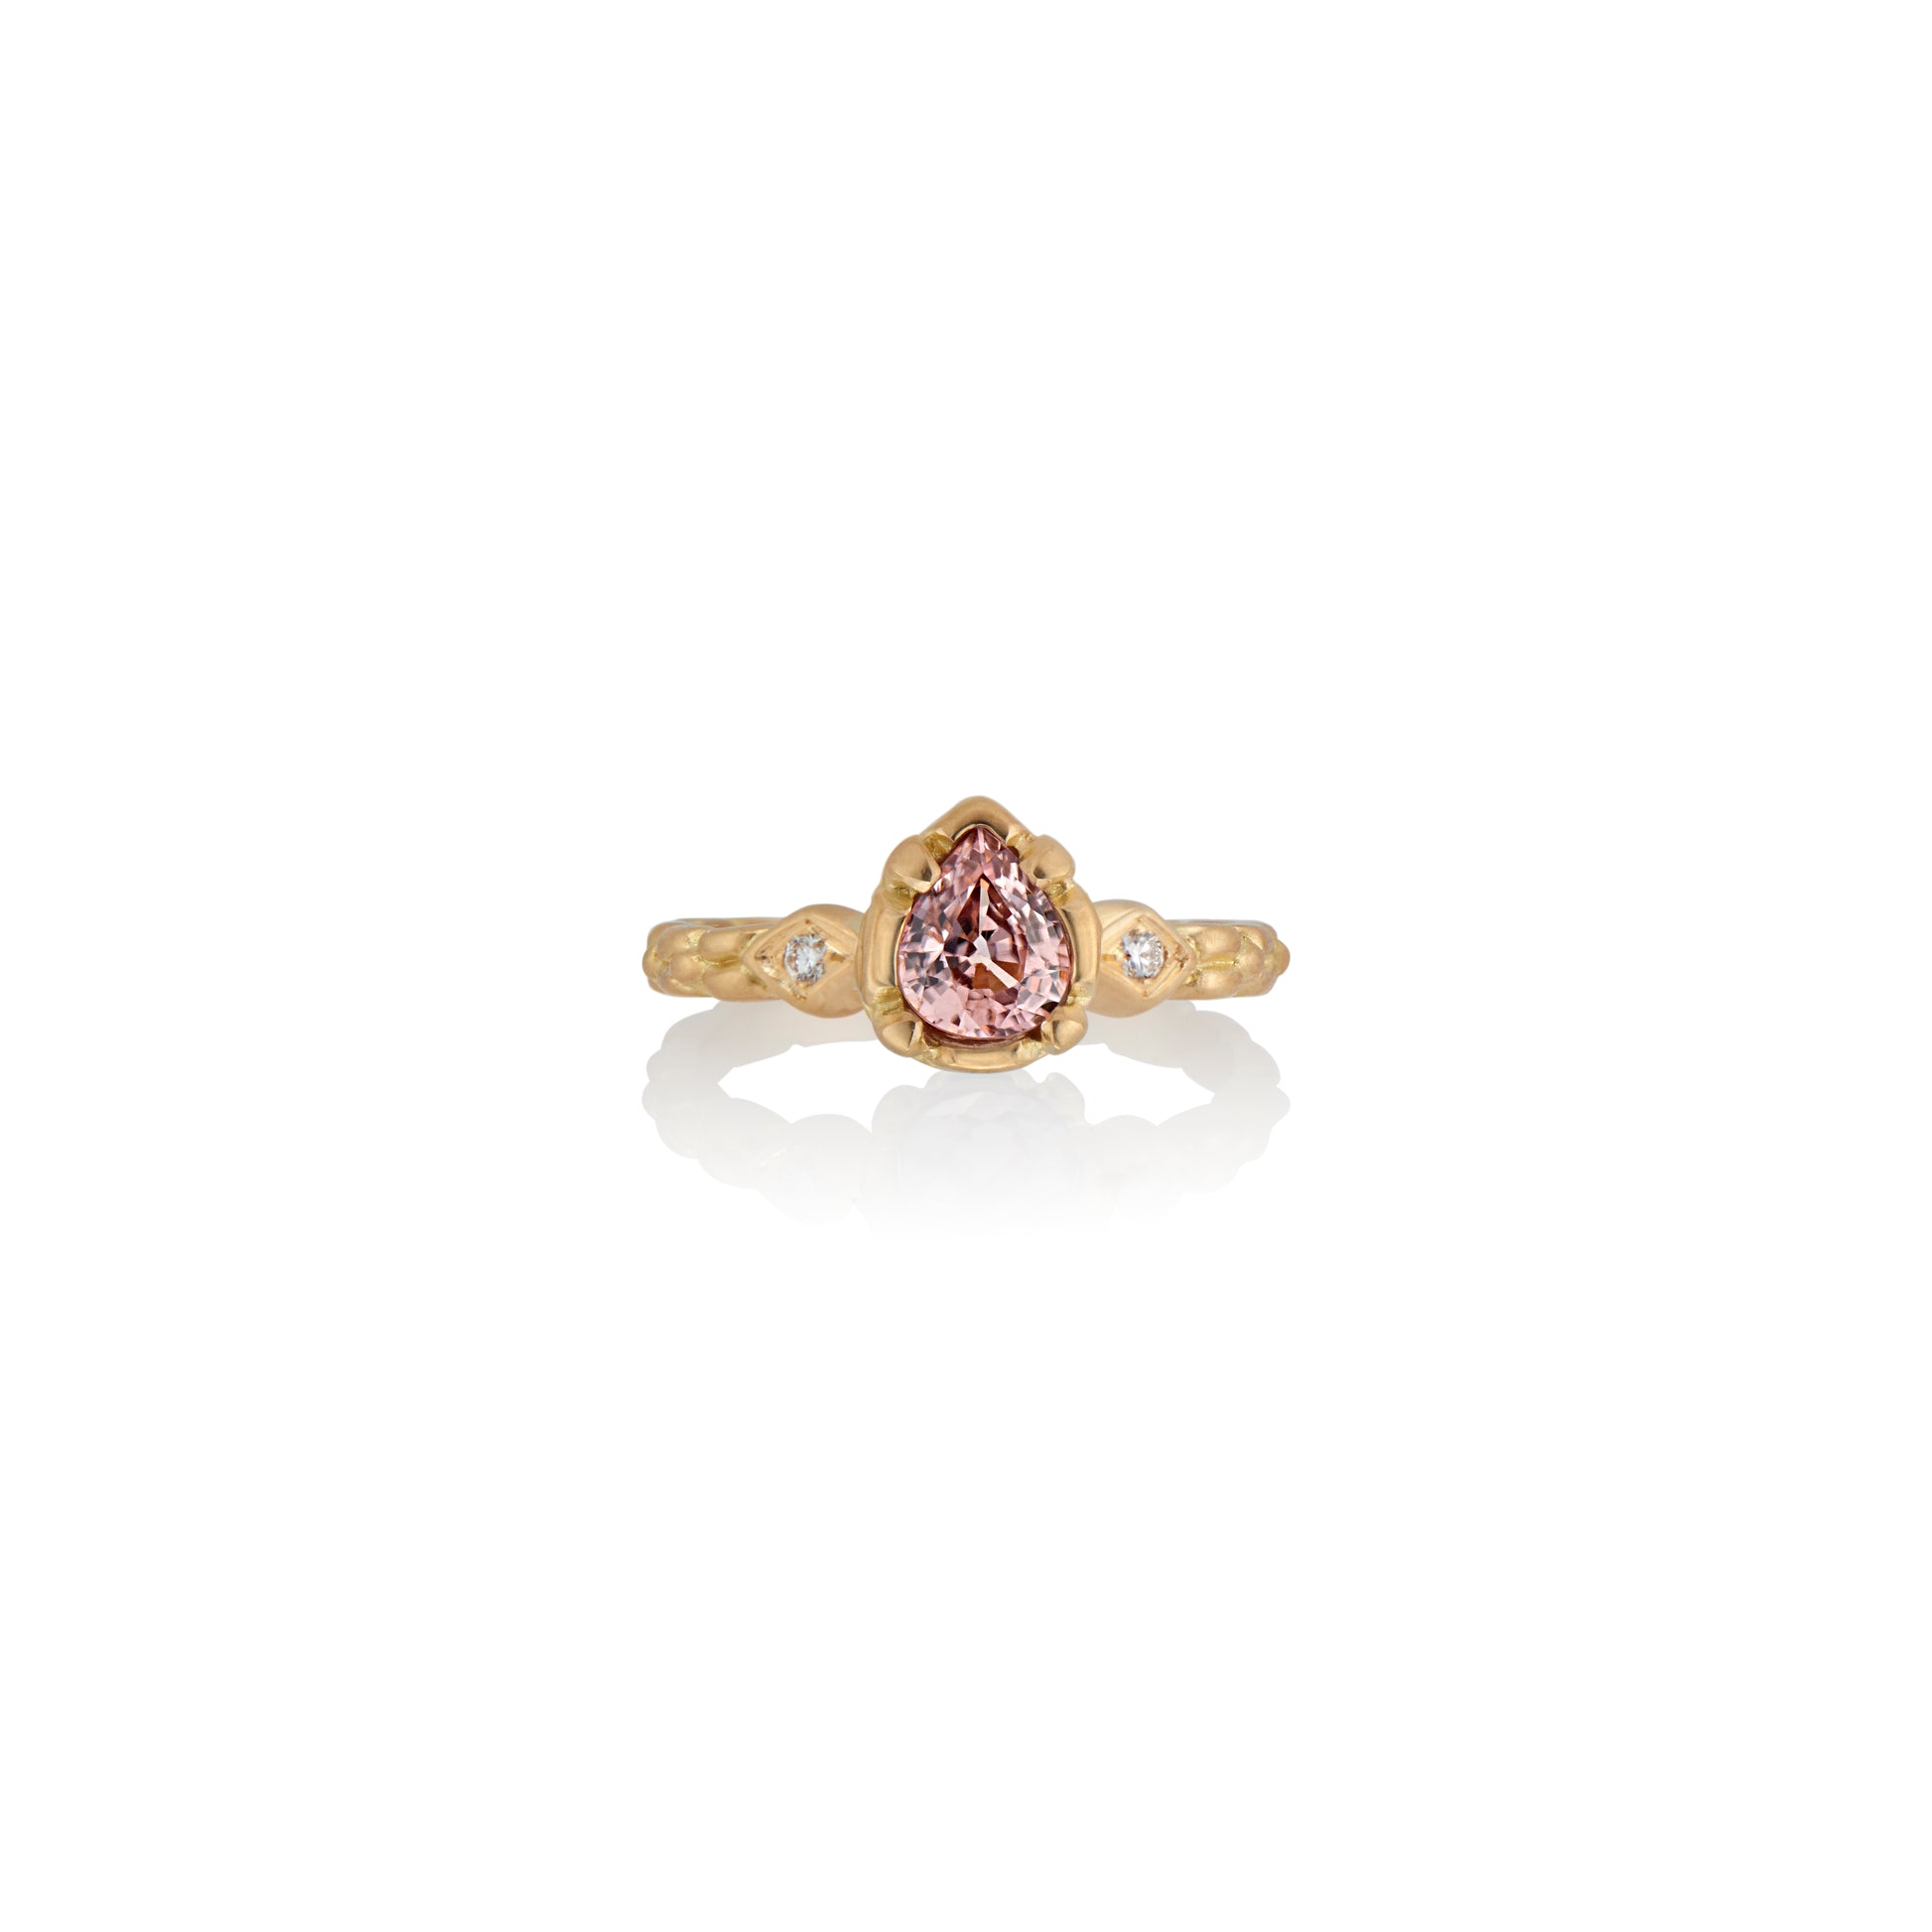 Stately and elegant, the Majestic ring is rich in exquisitely carved gold detail along the band, securing a pear-shaped pink zircon that commands attention—a piece evocative of royalty. 